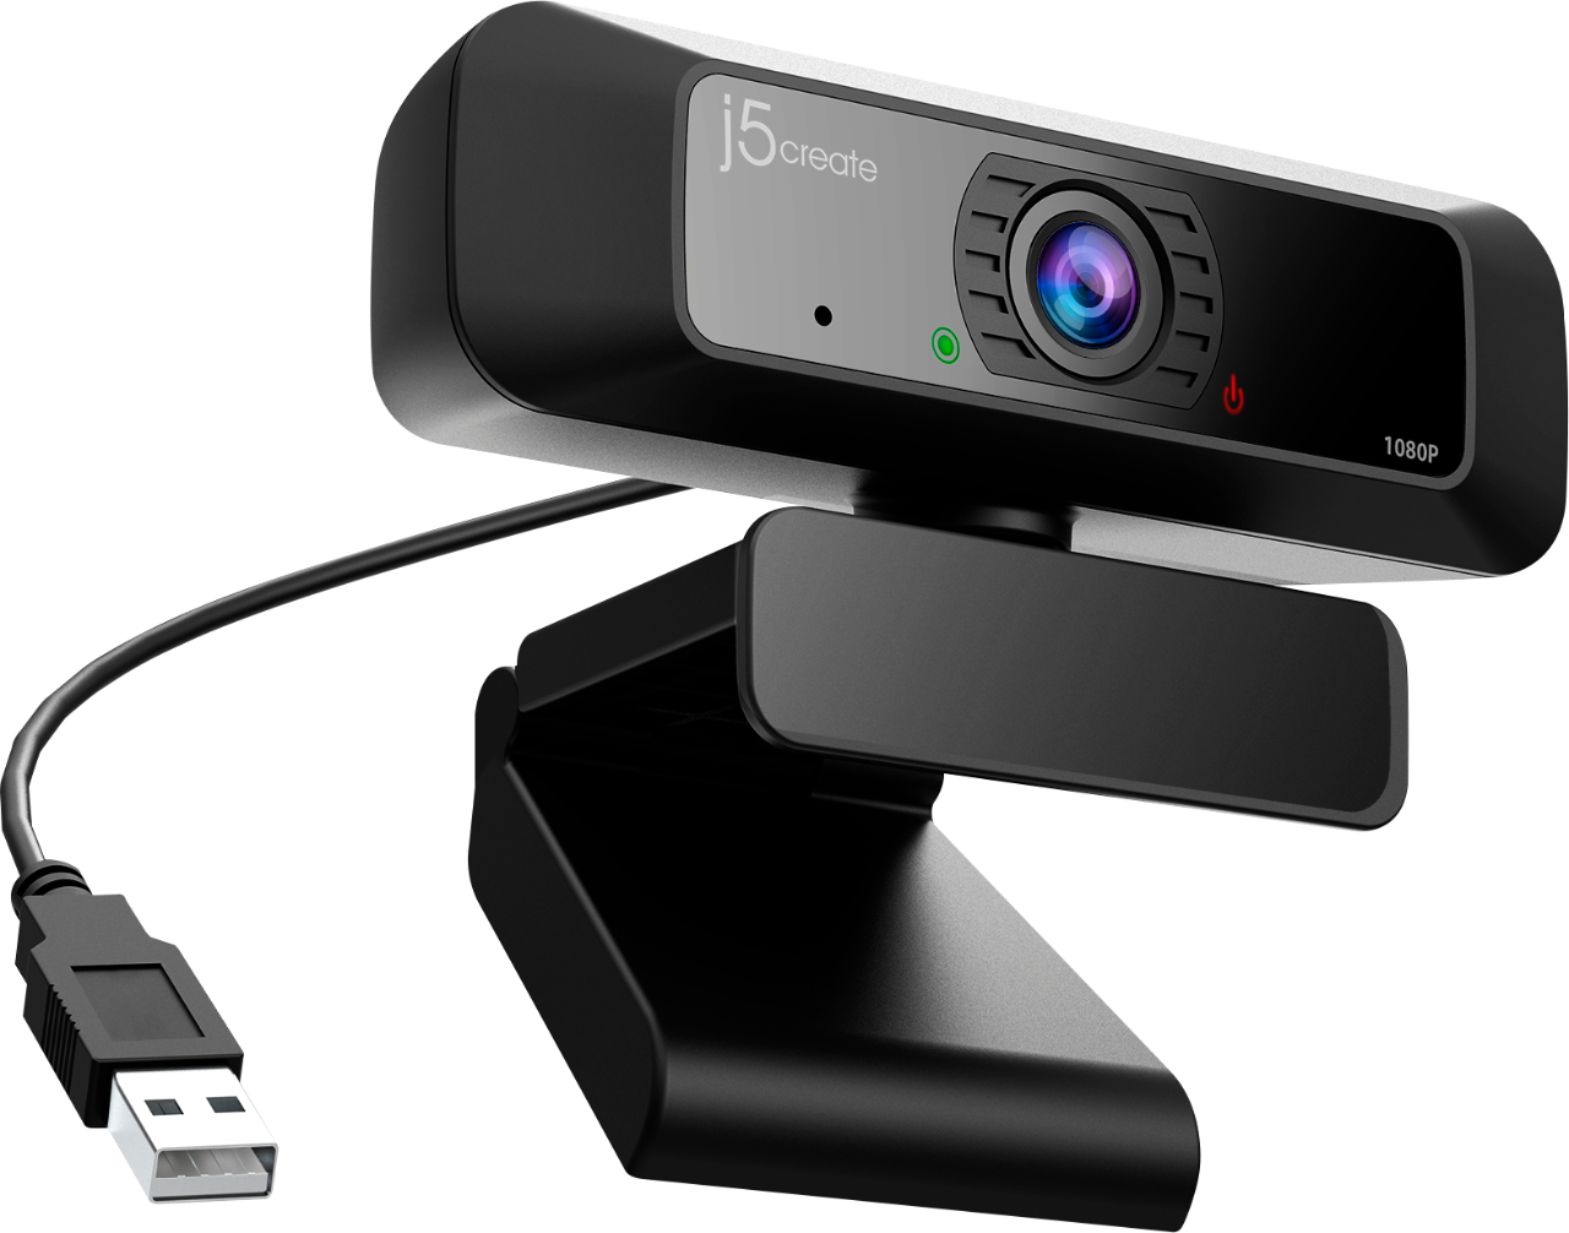 Angle View: Logitech - C930s Pro HD 1080 Webcam for Laptops with Ultra Wide Angle - Black